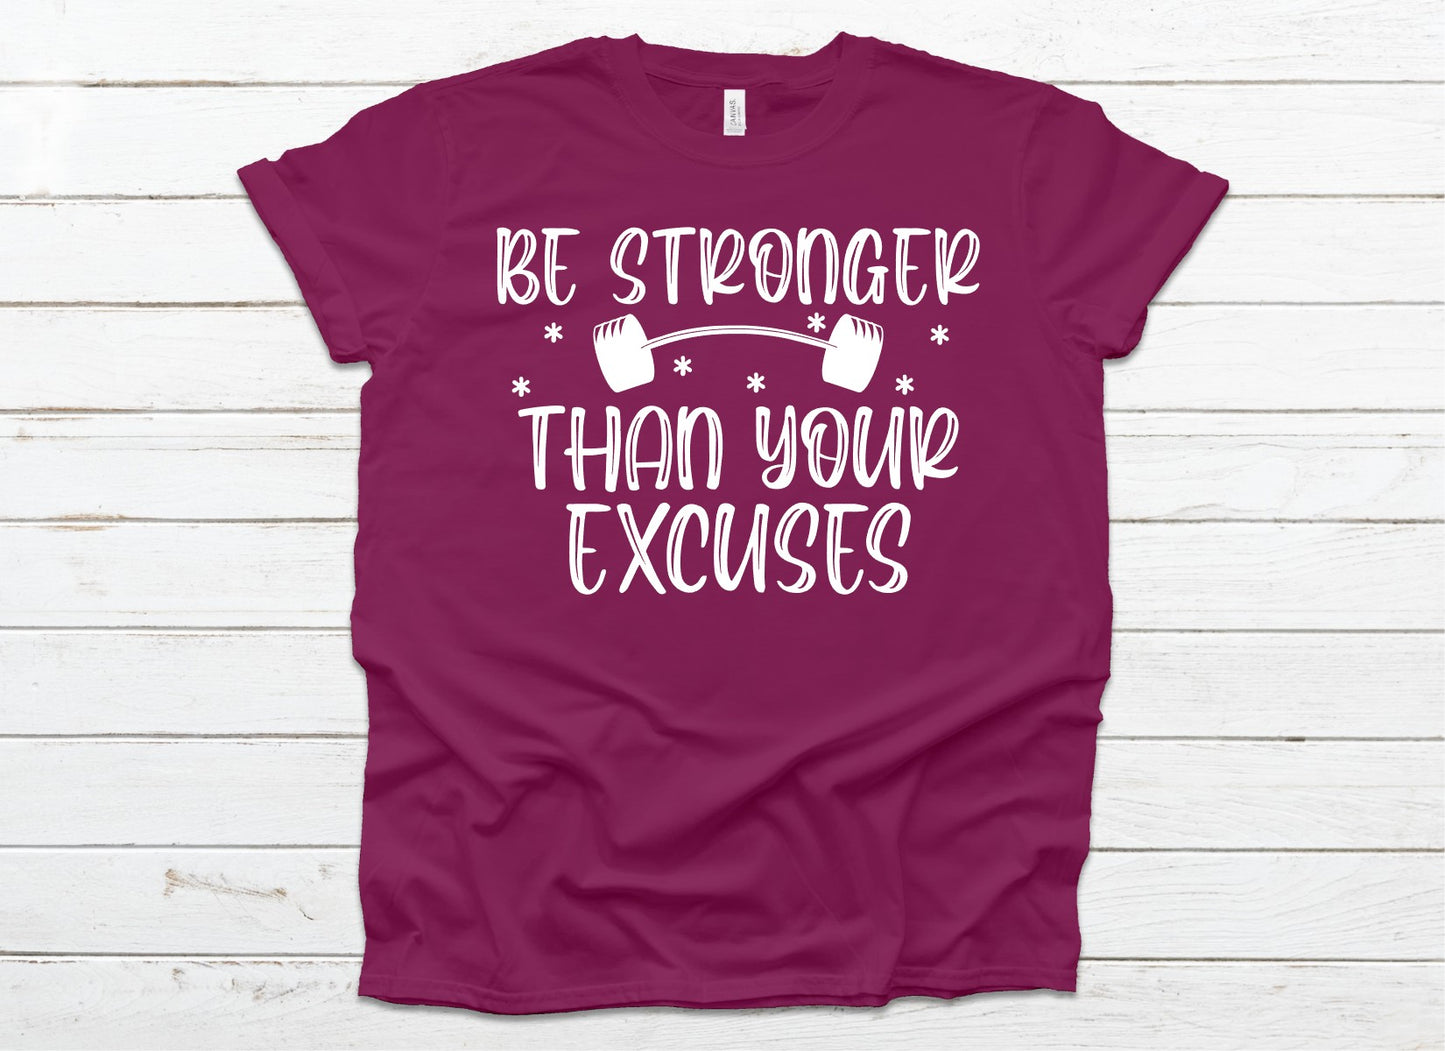 Be stronger than your excuses